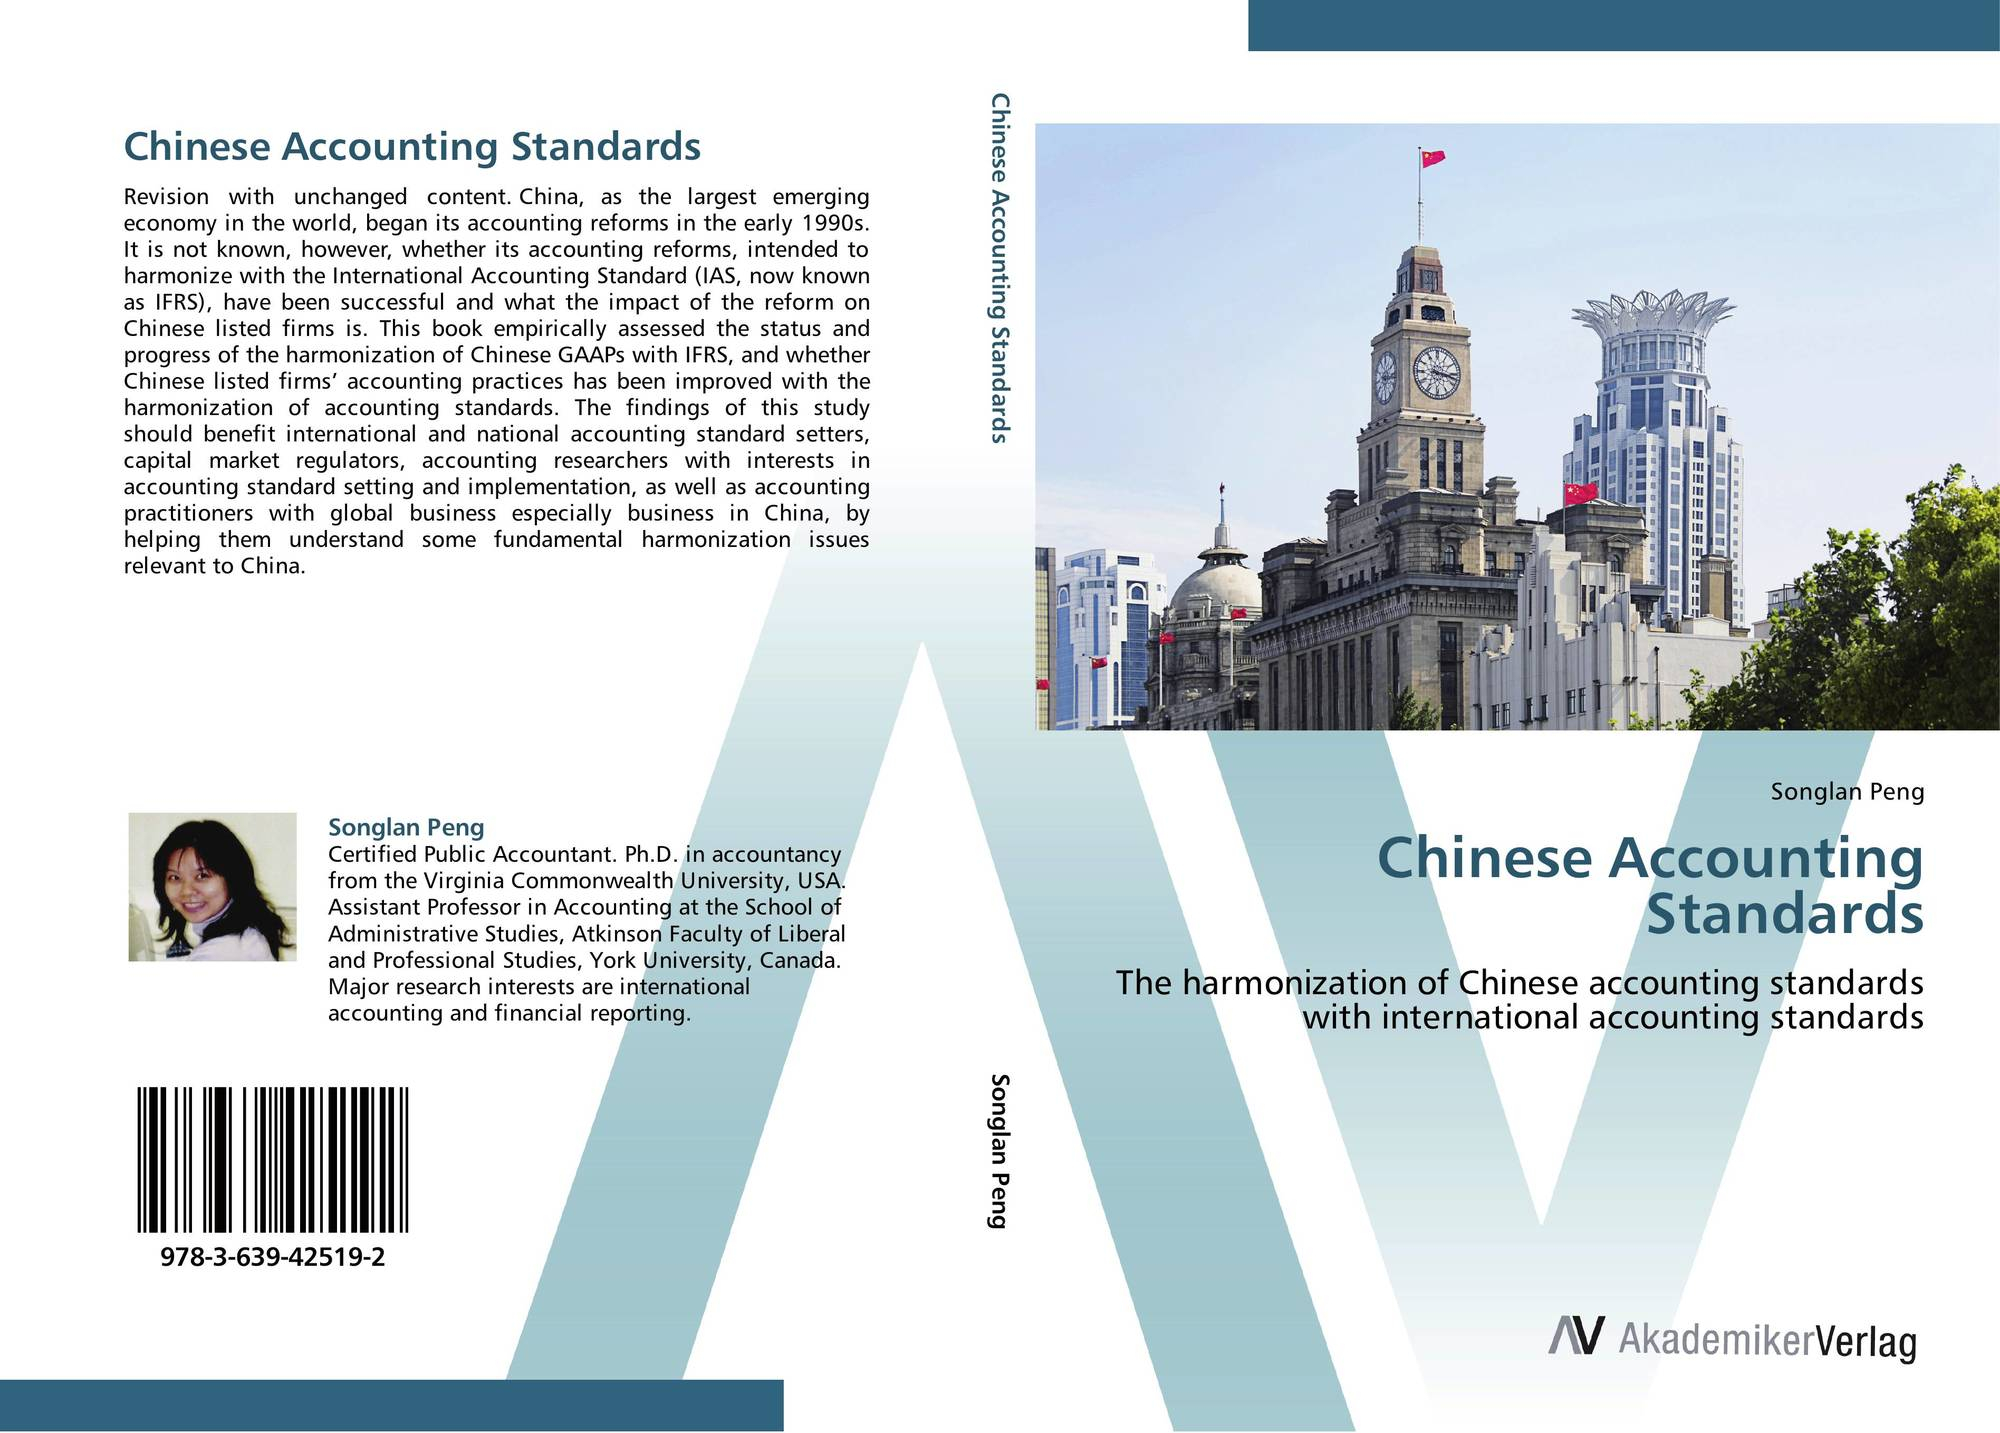 Chinese Accounting Standards 978 3 639 42519 2 3639425197